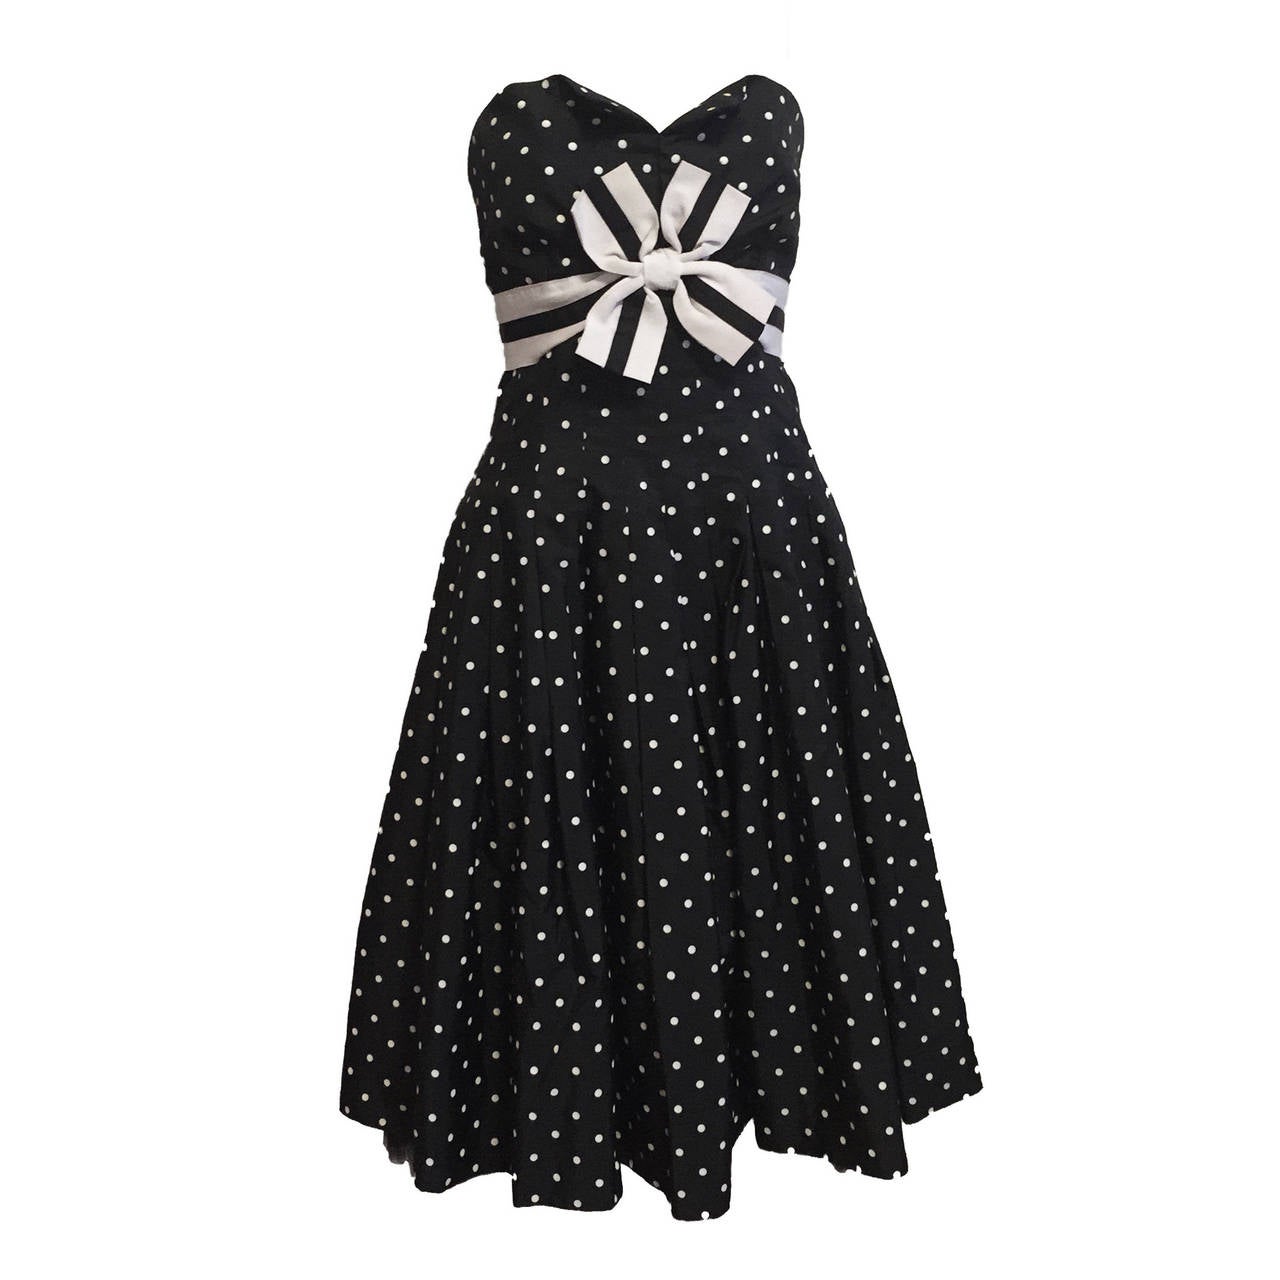 Victor Costa Famous Black & White Dot Dress For Sale